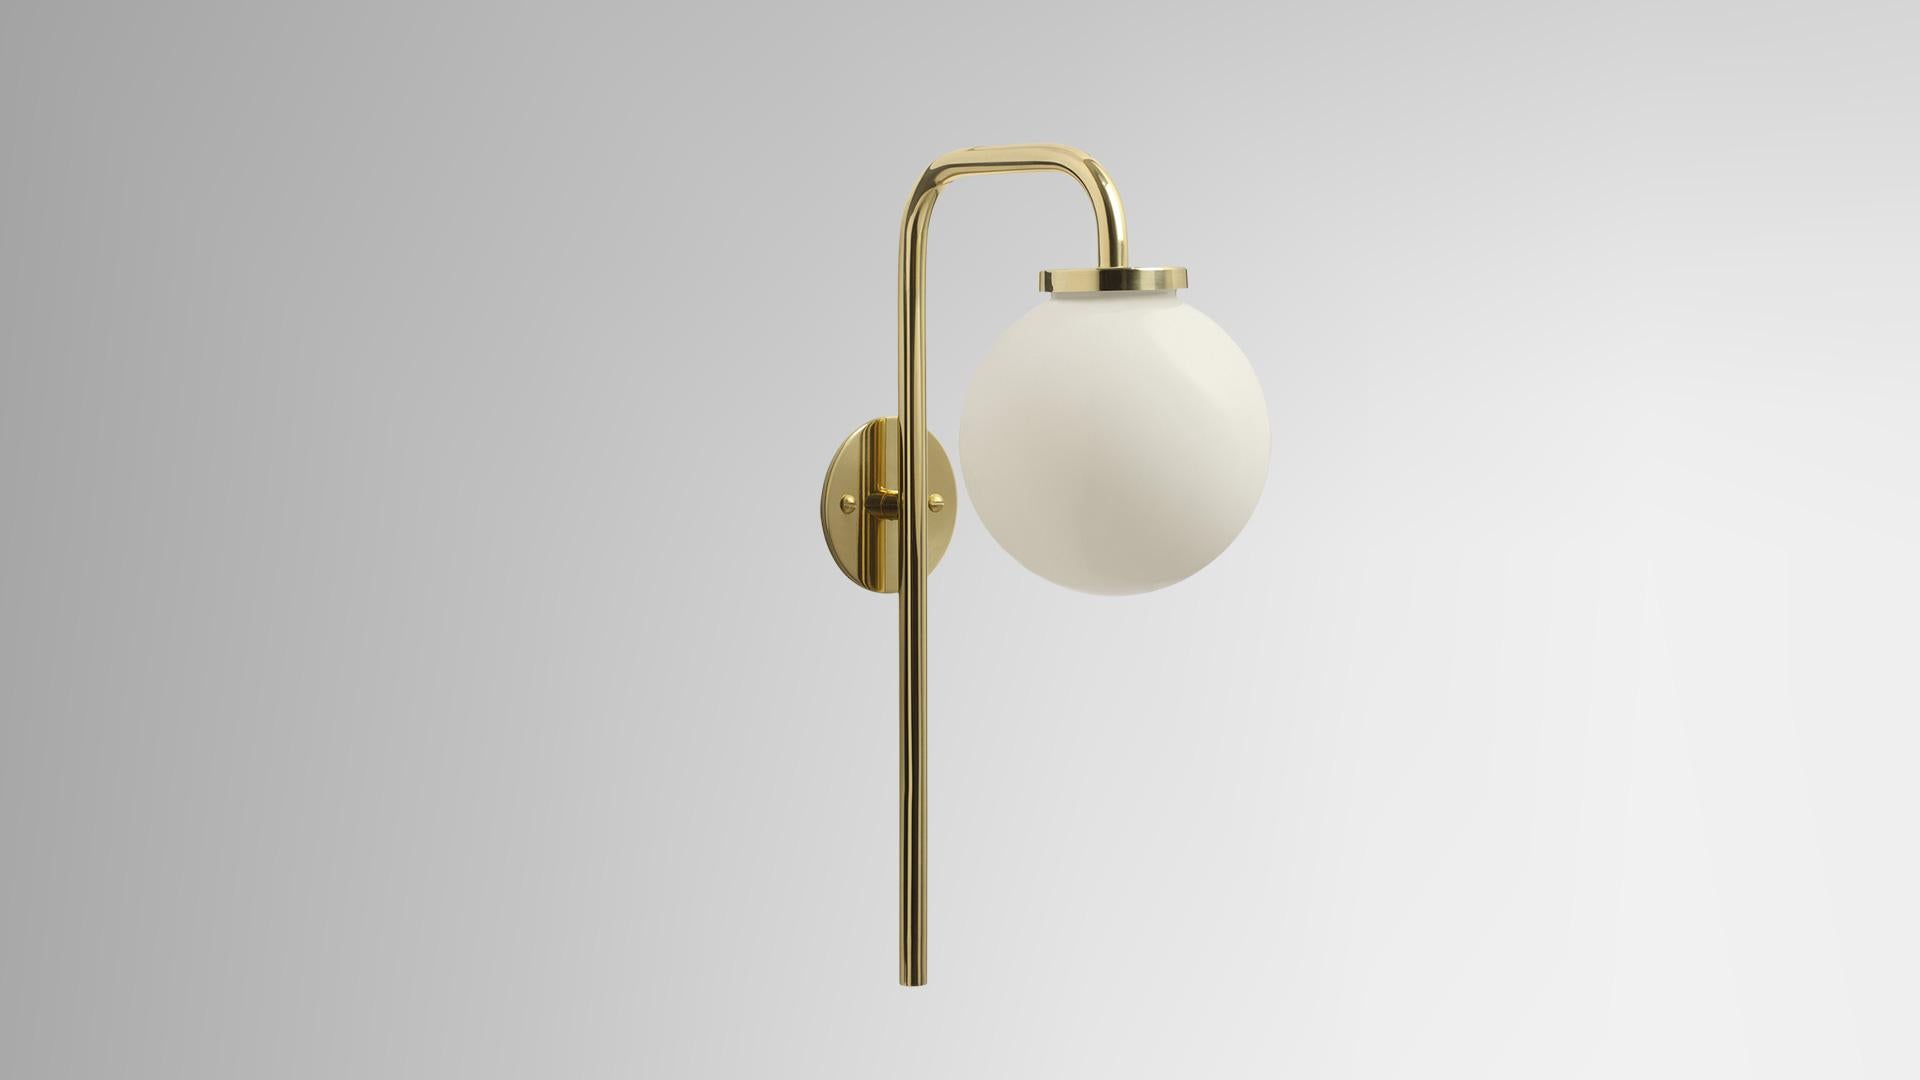 Polished brass opal big bulb wall lamp by CTO Lighting
Materials: Polished brass with opal glass shade
Dimensions: 20 x H 36 cm

All our lamps can be wired according to each country. If sold to the USA it will be wired for the USA for instance.

1 x